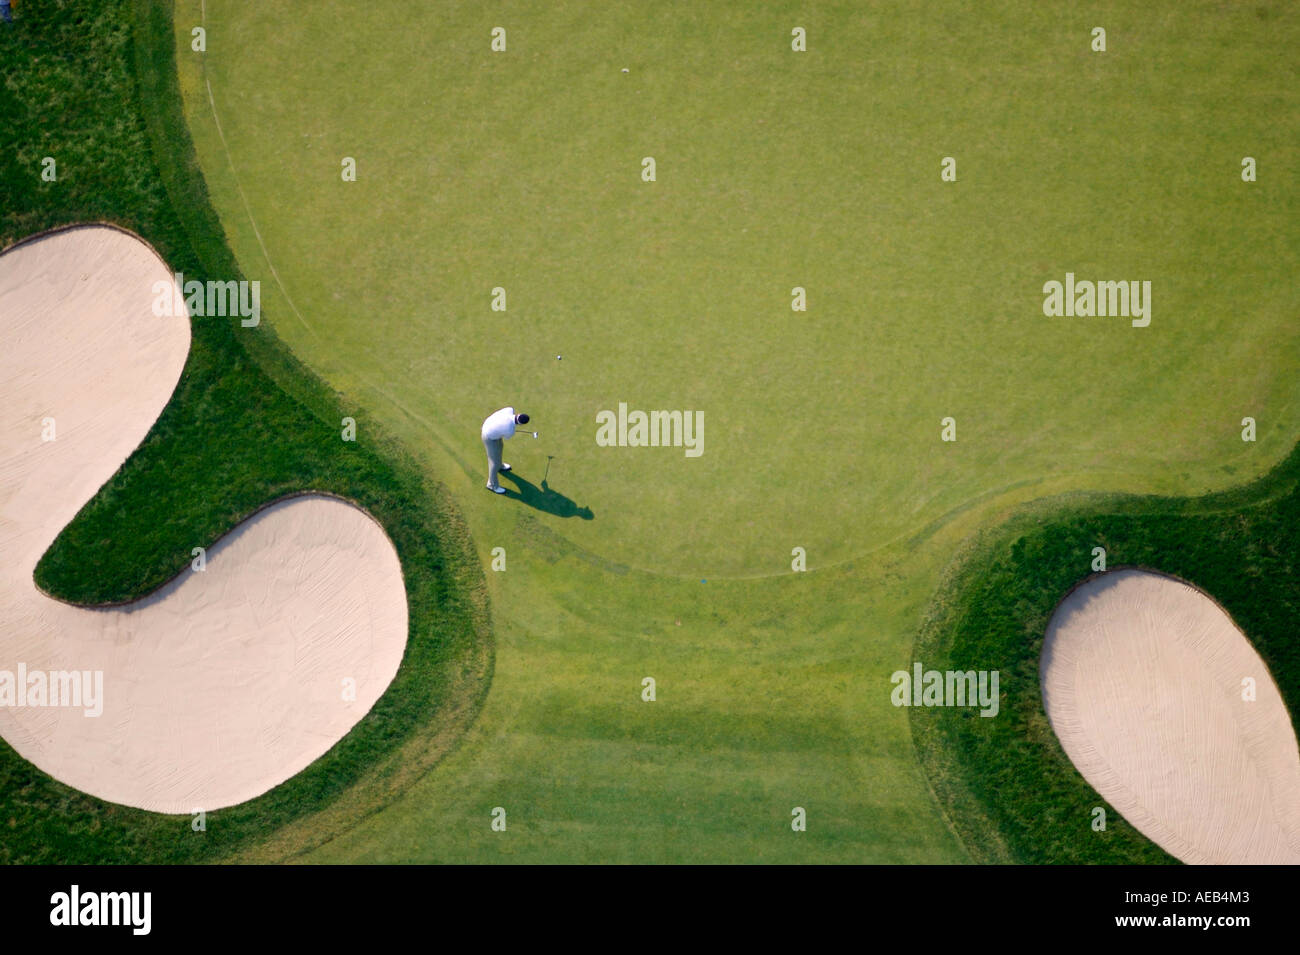 Golfer putting as seen from overhead Stock Photo